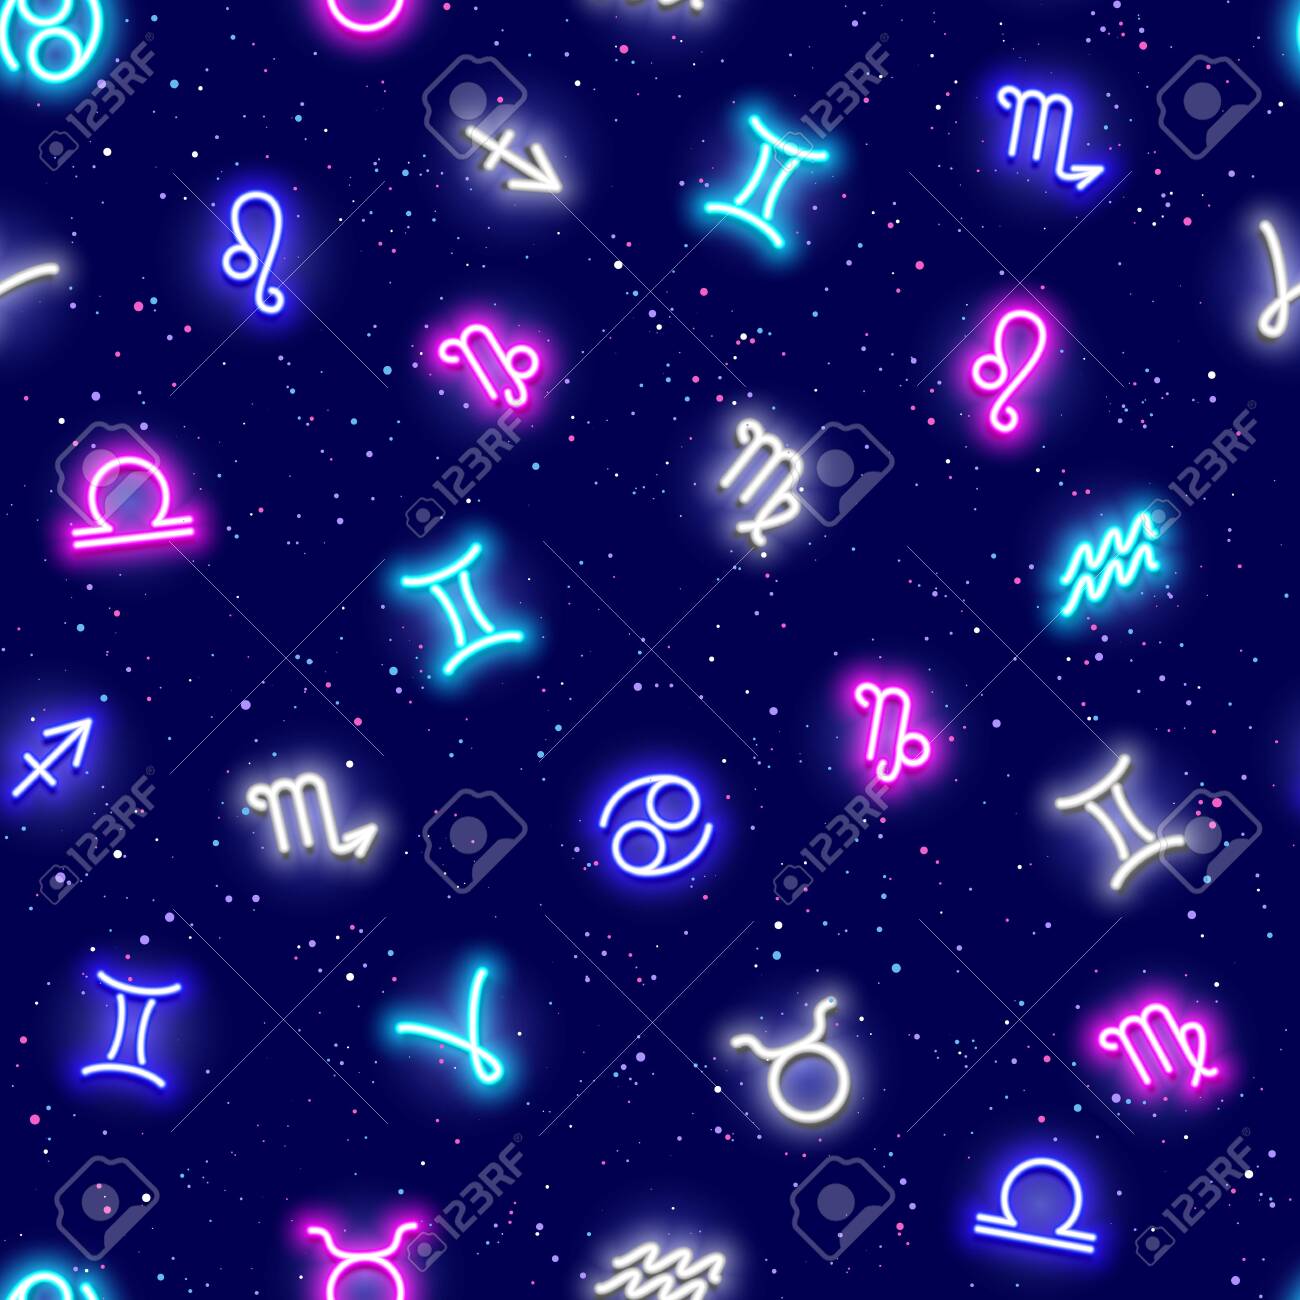 Zodiac Signs Horoscrope Symbols Stars In Space Seamless Pattern